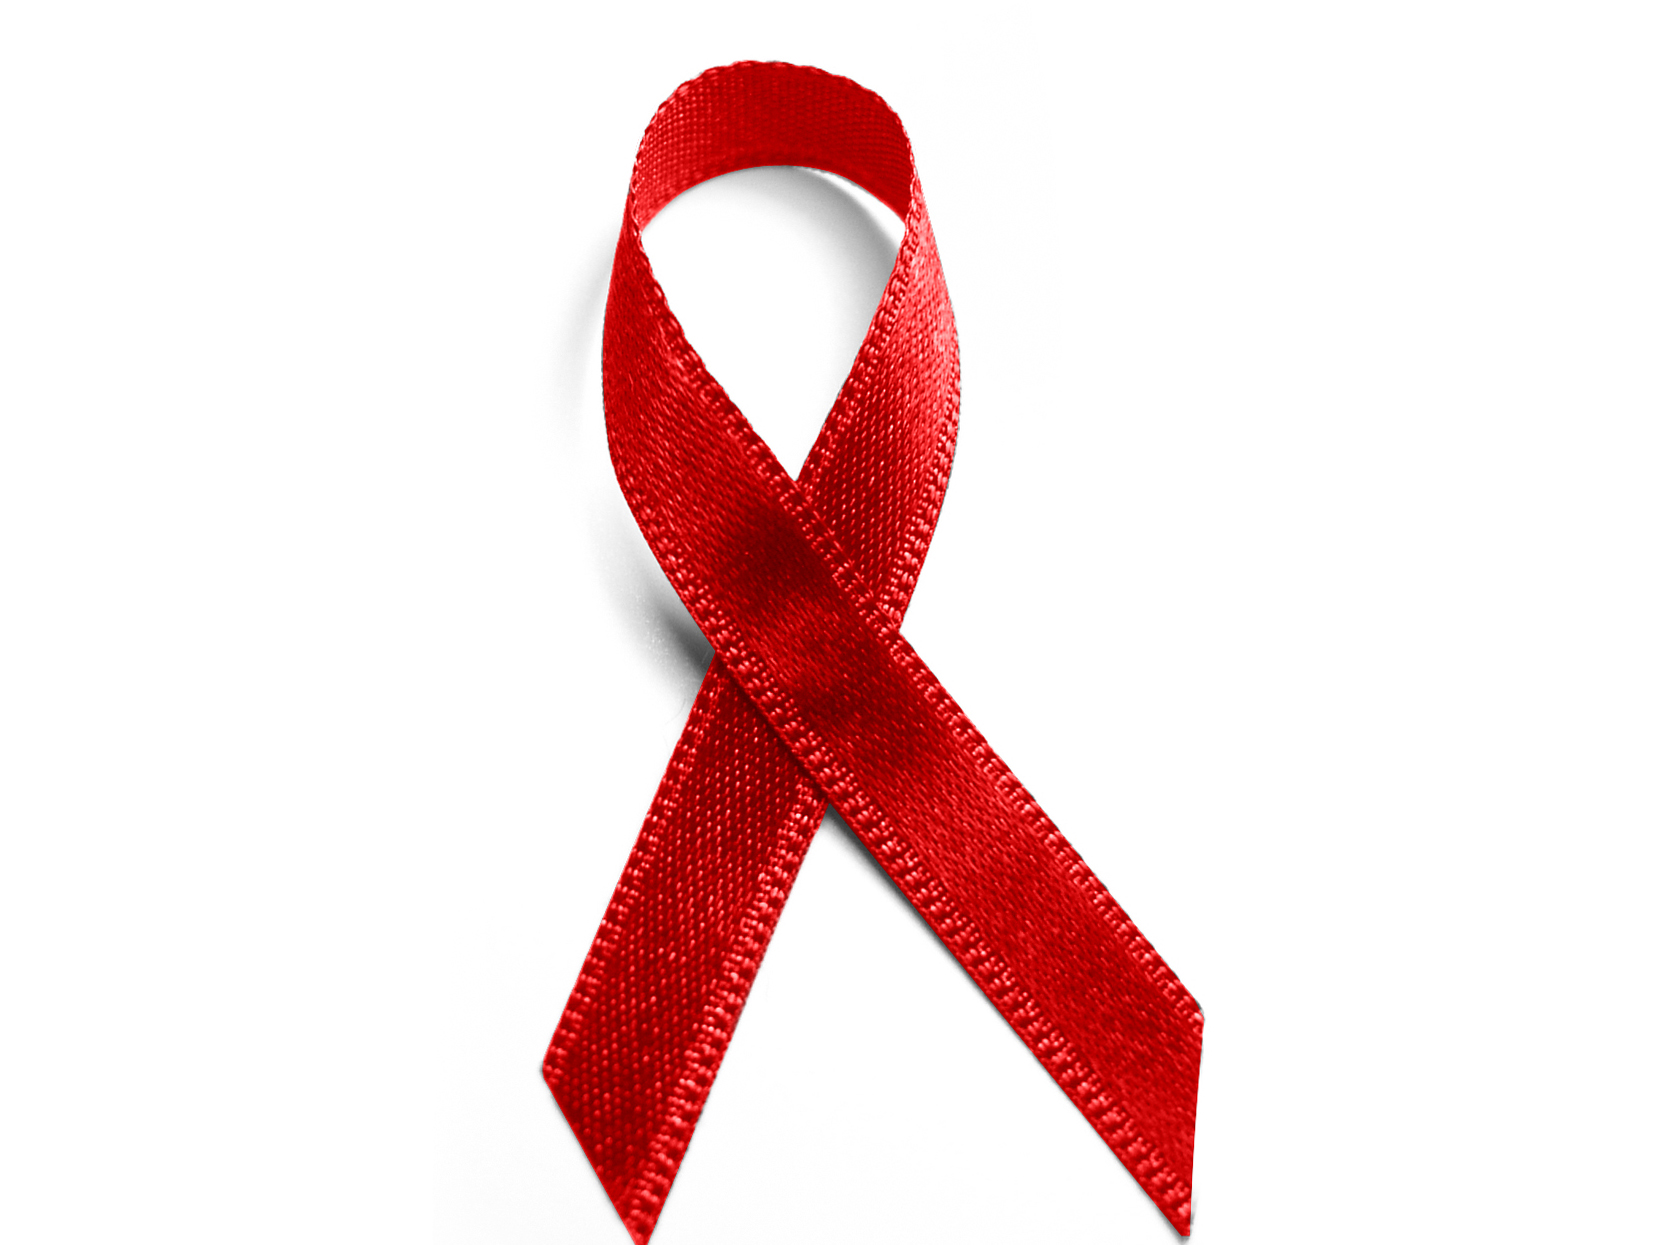 people living with aids need to be destigmatised